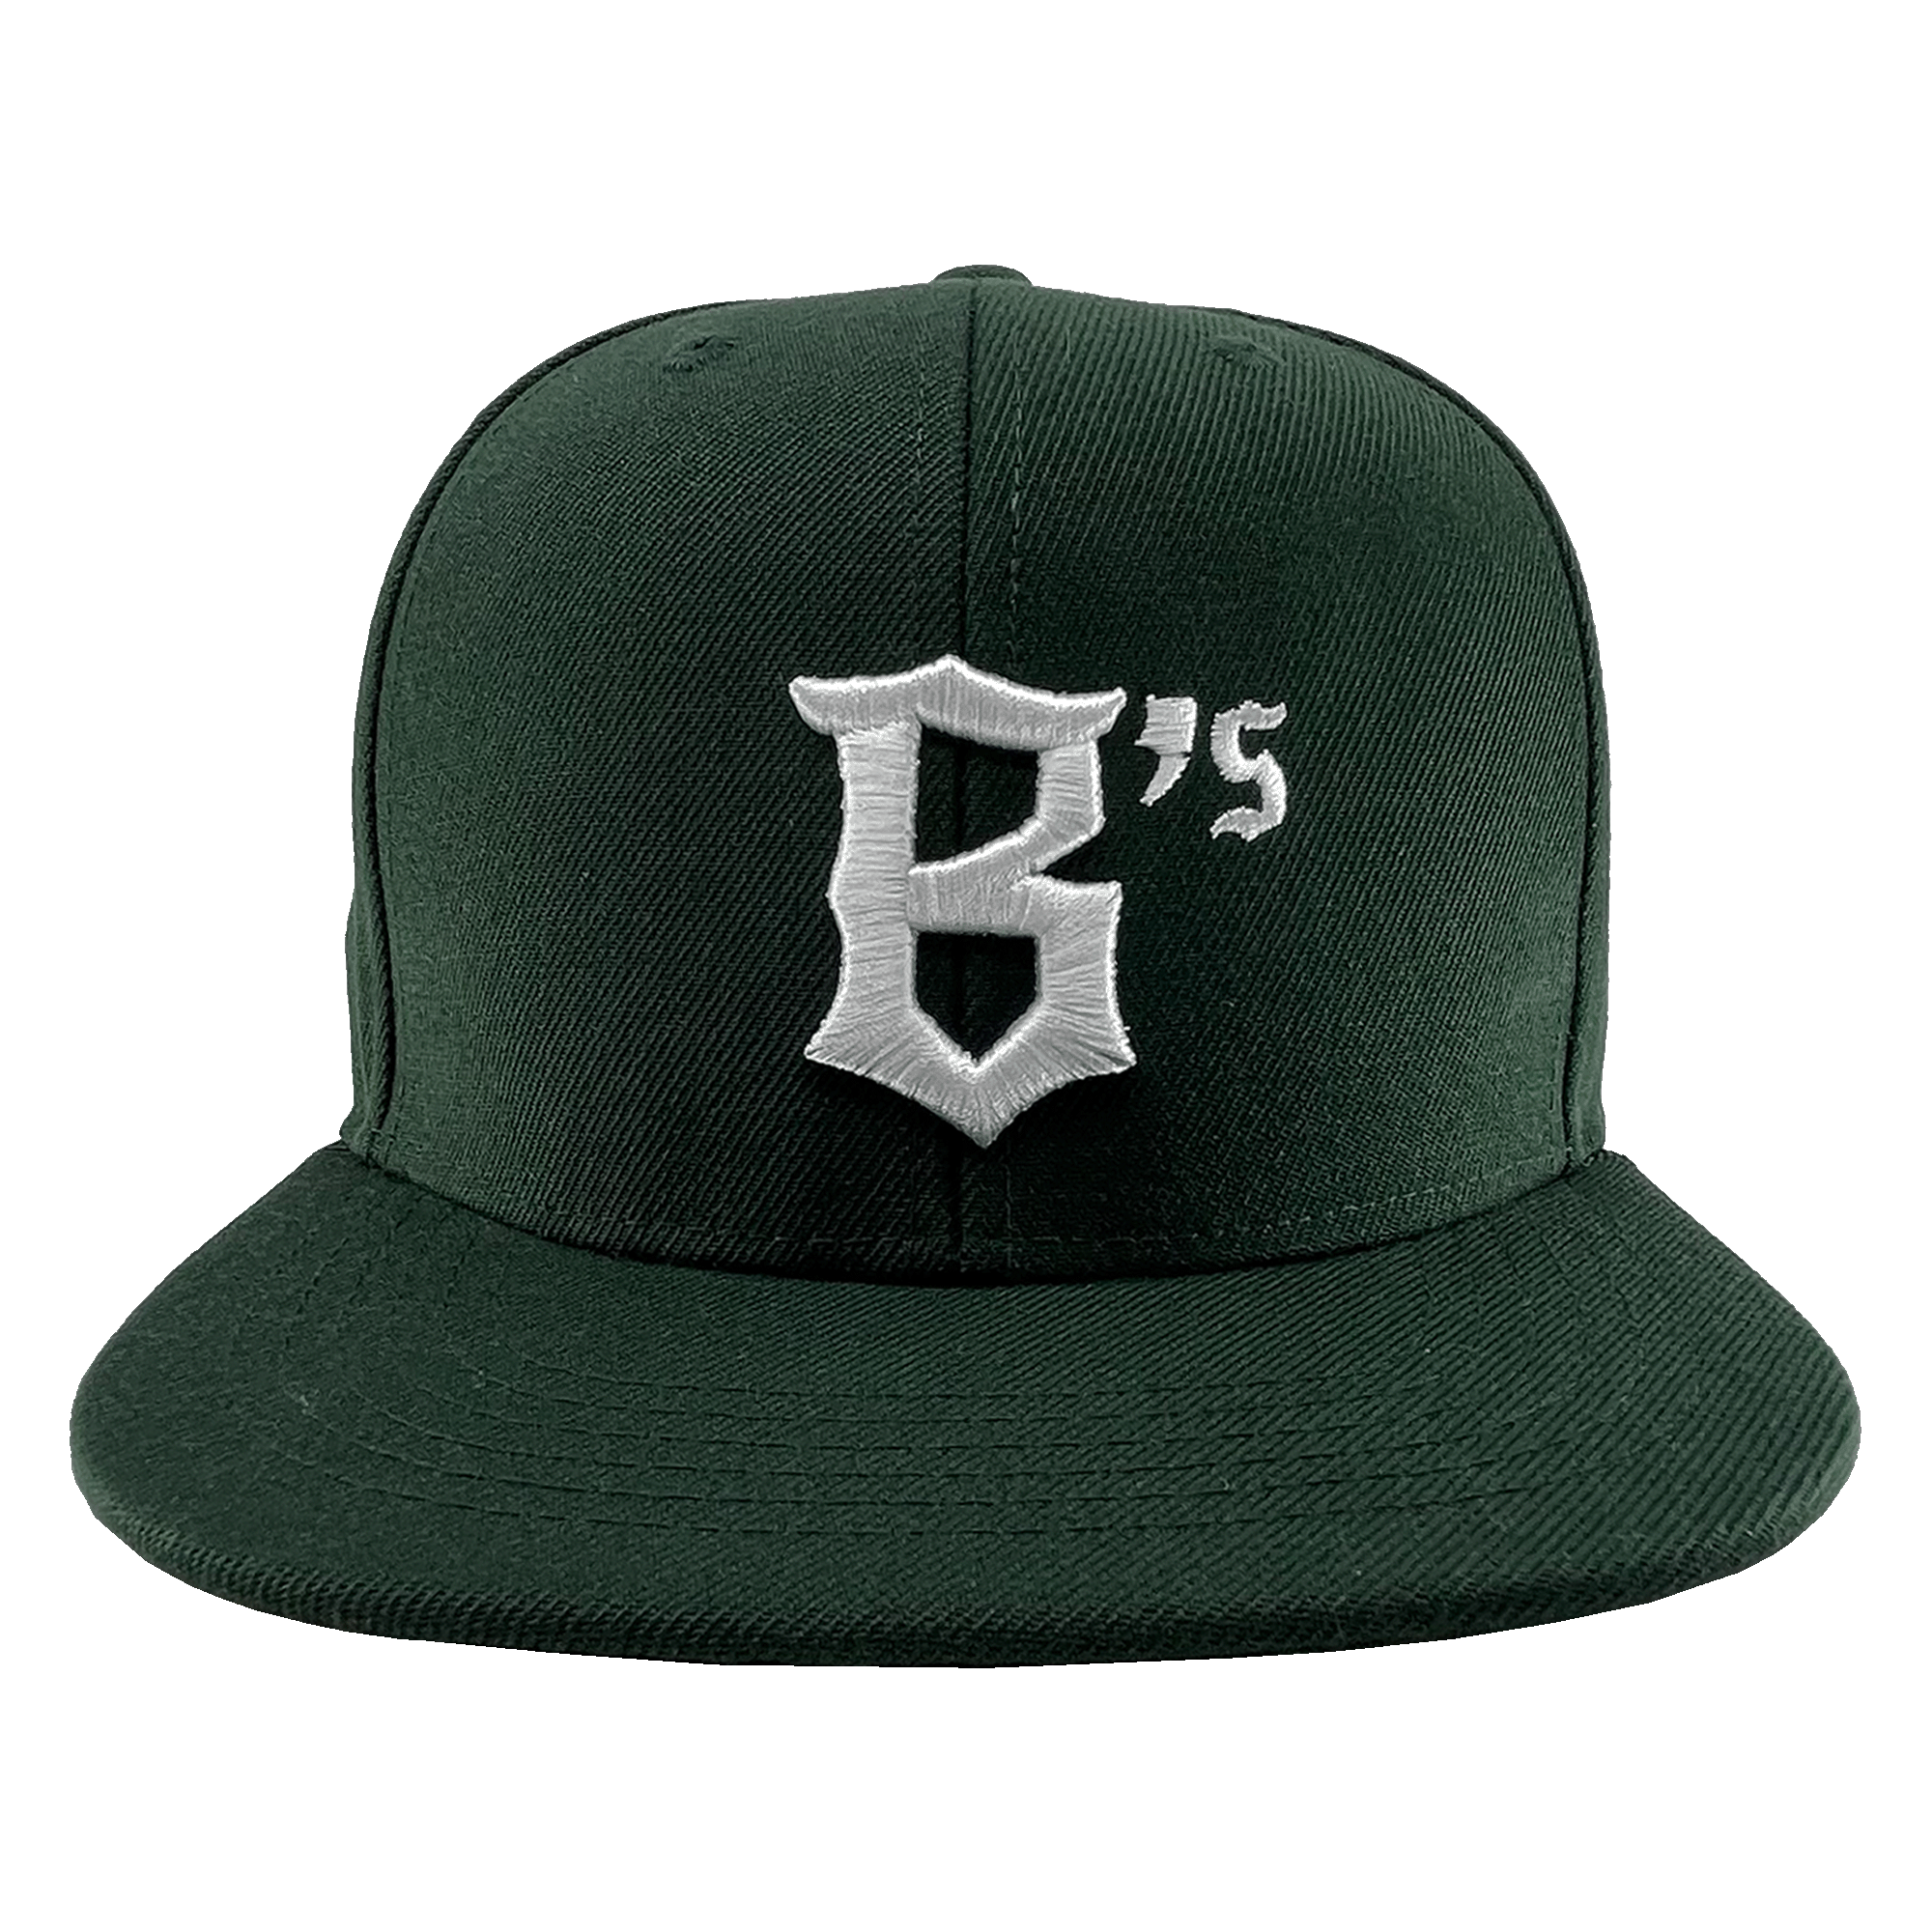  Front view of a forest green hat with a green bill and white B’s logo on the front crown.